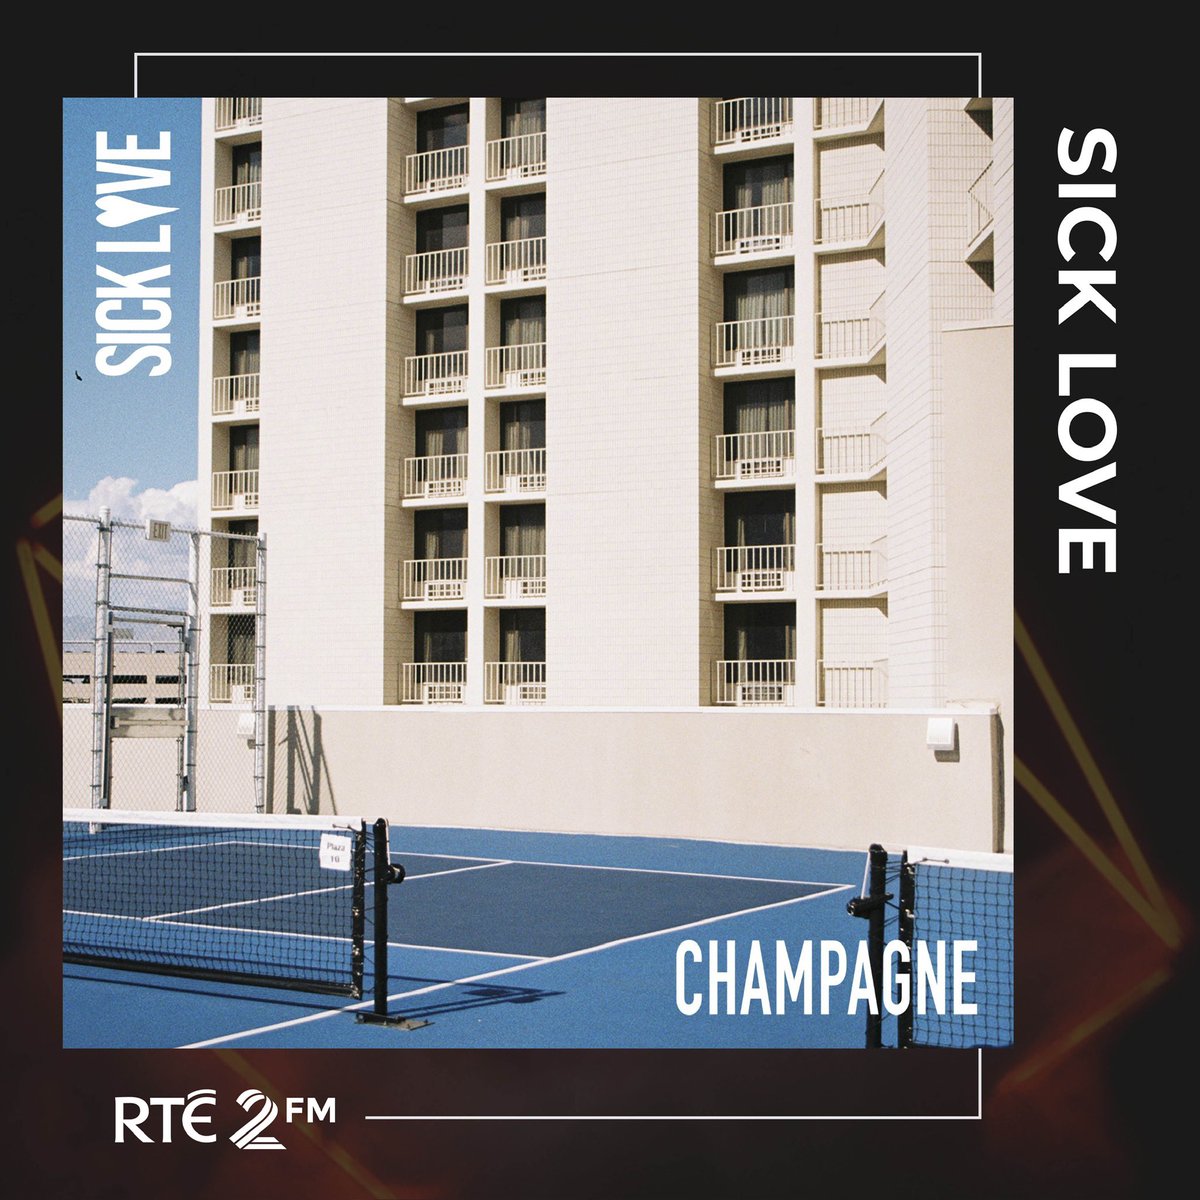 Our #2FMRising artists @wearesicklove are about to release their new album ‘Champagne’ tomorrow! 🔥🎙️ Check out their ‘New Music Show’ takeover tonight with @betadasilva7 for some album chats and tunes.👏 | From 7pm